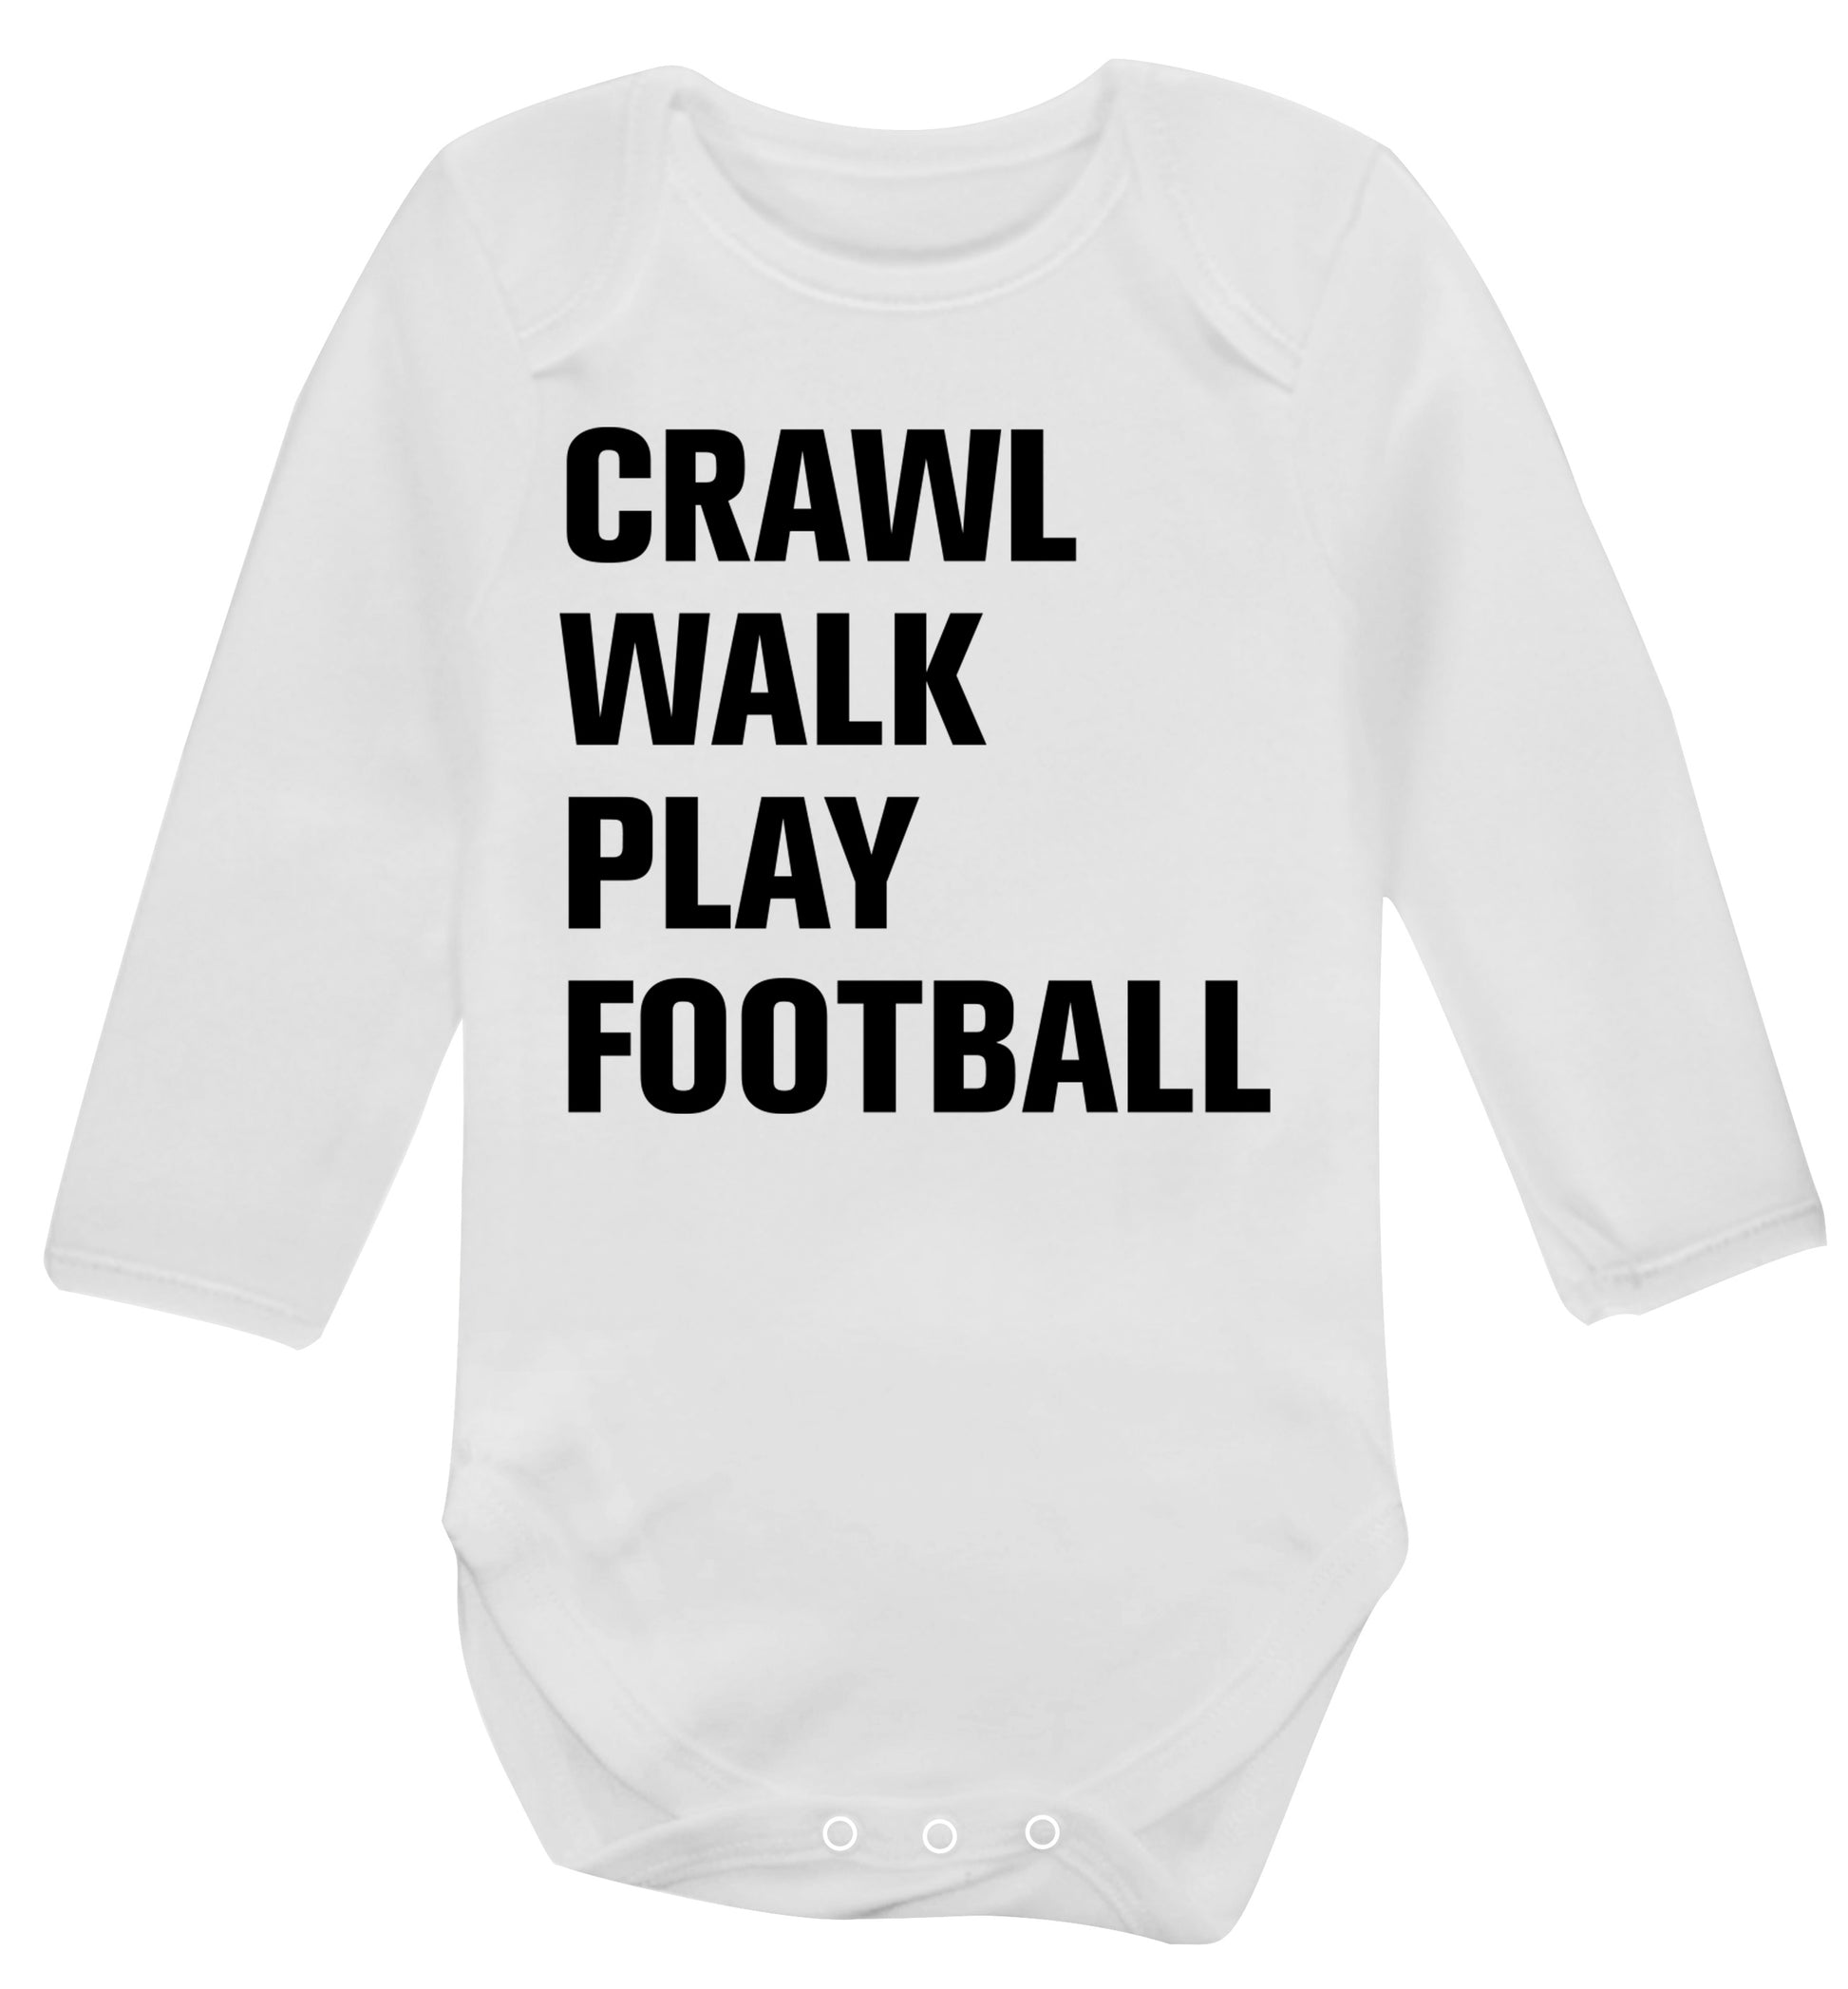 Crawl, walk, play football Baby Vest long sleeved white 6-12 months